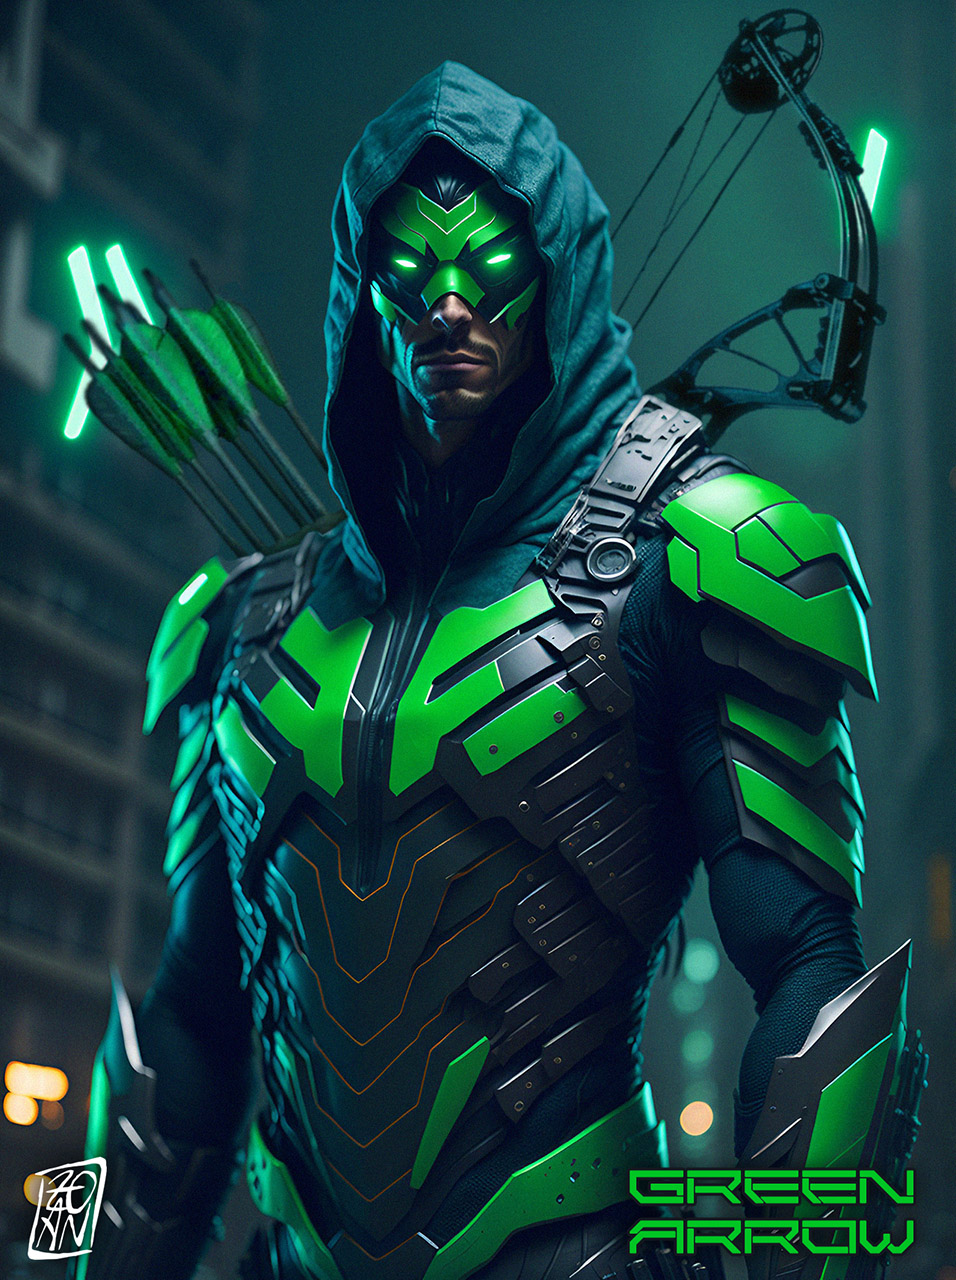 Image of GREEN ARROW (futuristic version II) made with AI and Photoshop. Green Arrow by DC Comics – All Rights Reserved